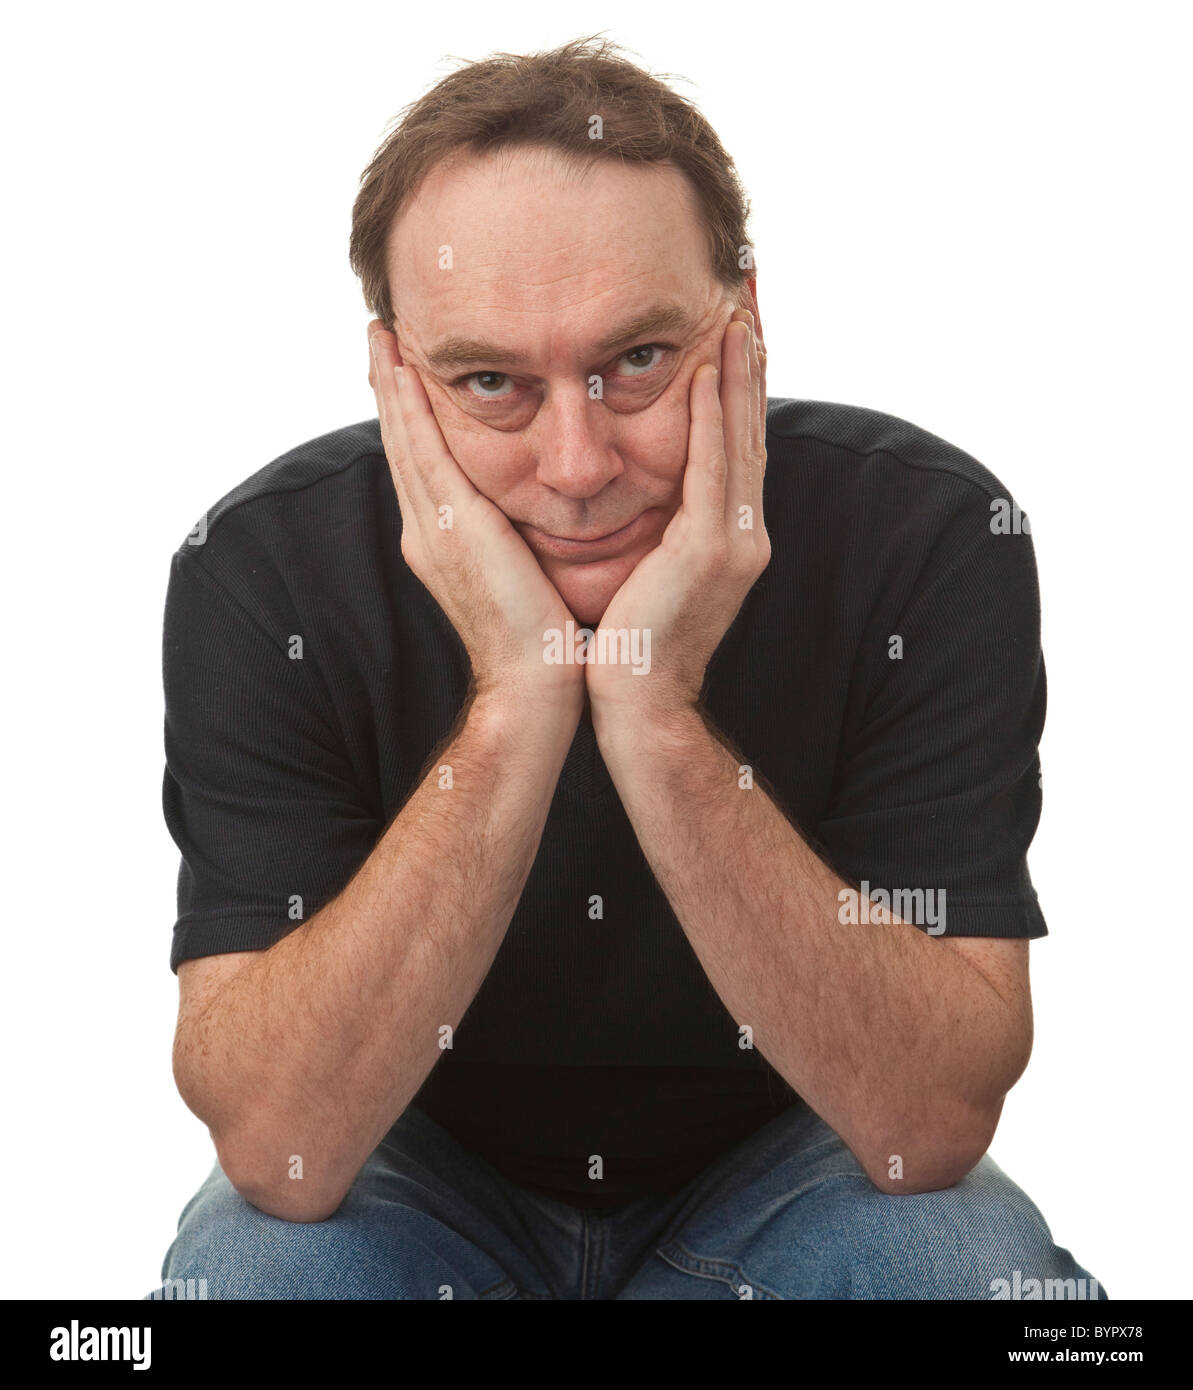 adult man sat with his head in his hands glancing upwards, he is casually dressed and isolated against a white background Stock Photo